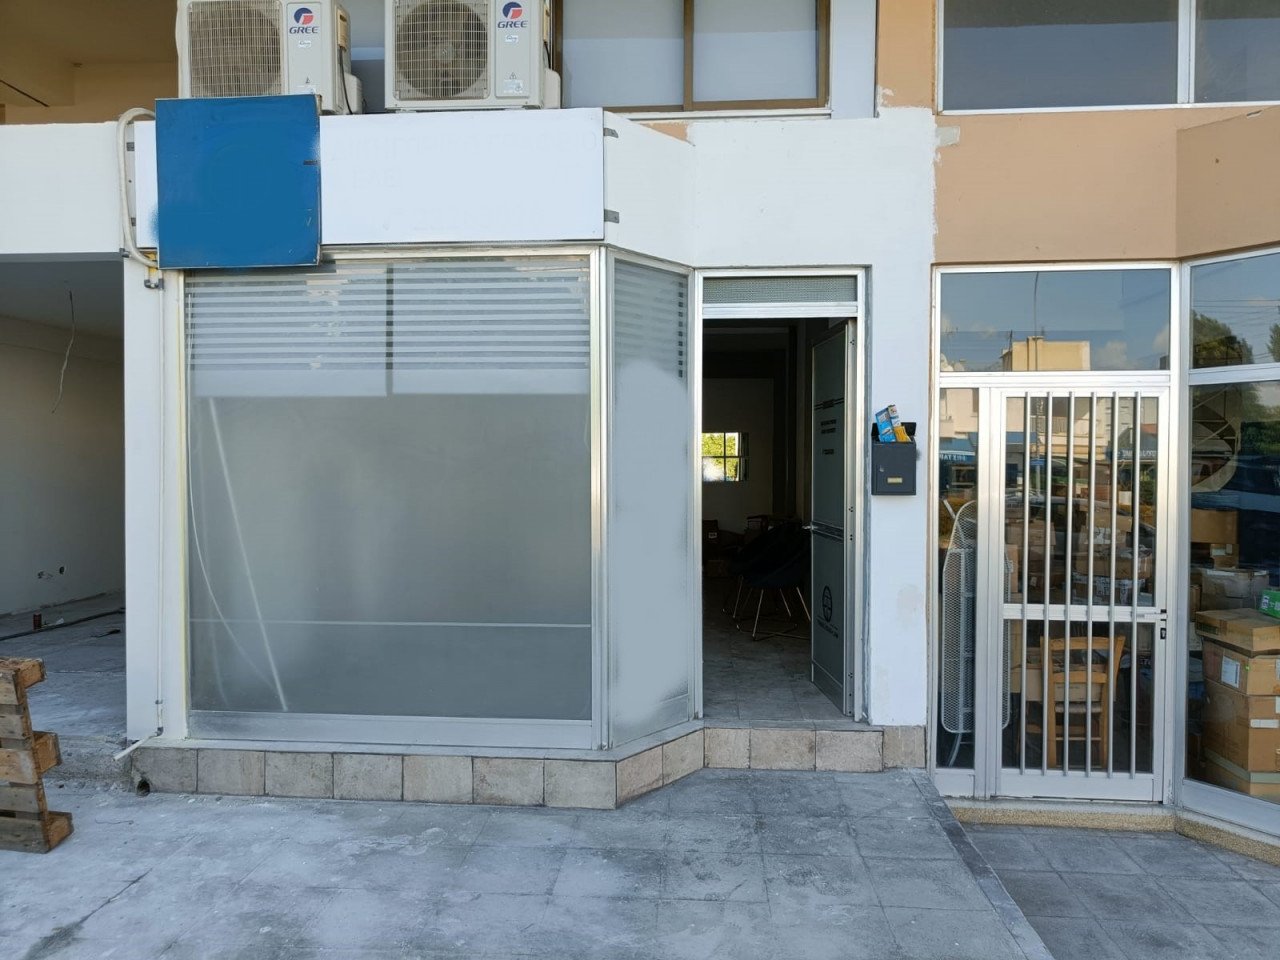 Property for Sale: Commercial (Office) in Agios Dometios, Nicosia  | Key Realtor Cyprus